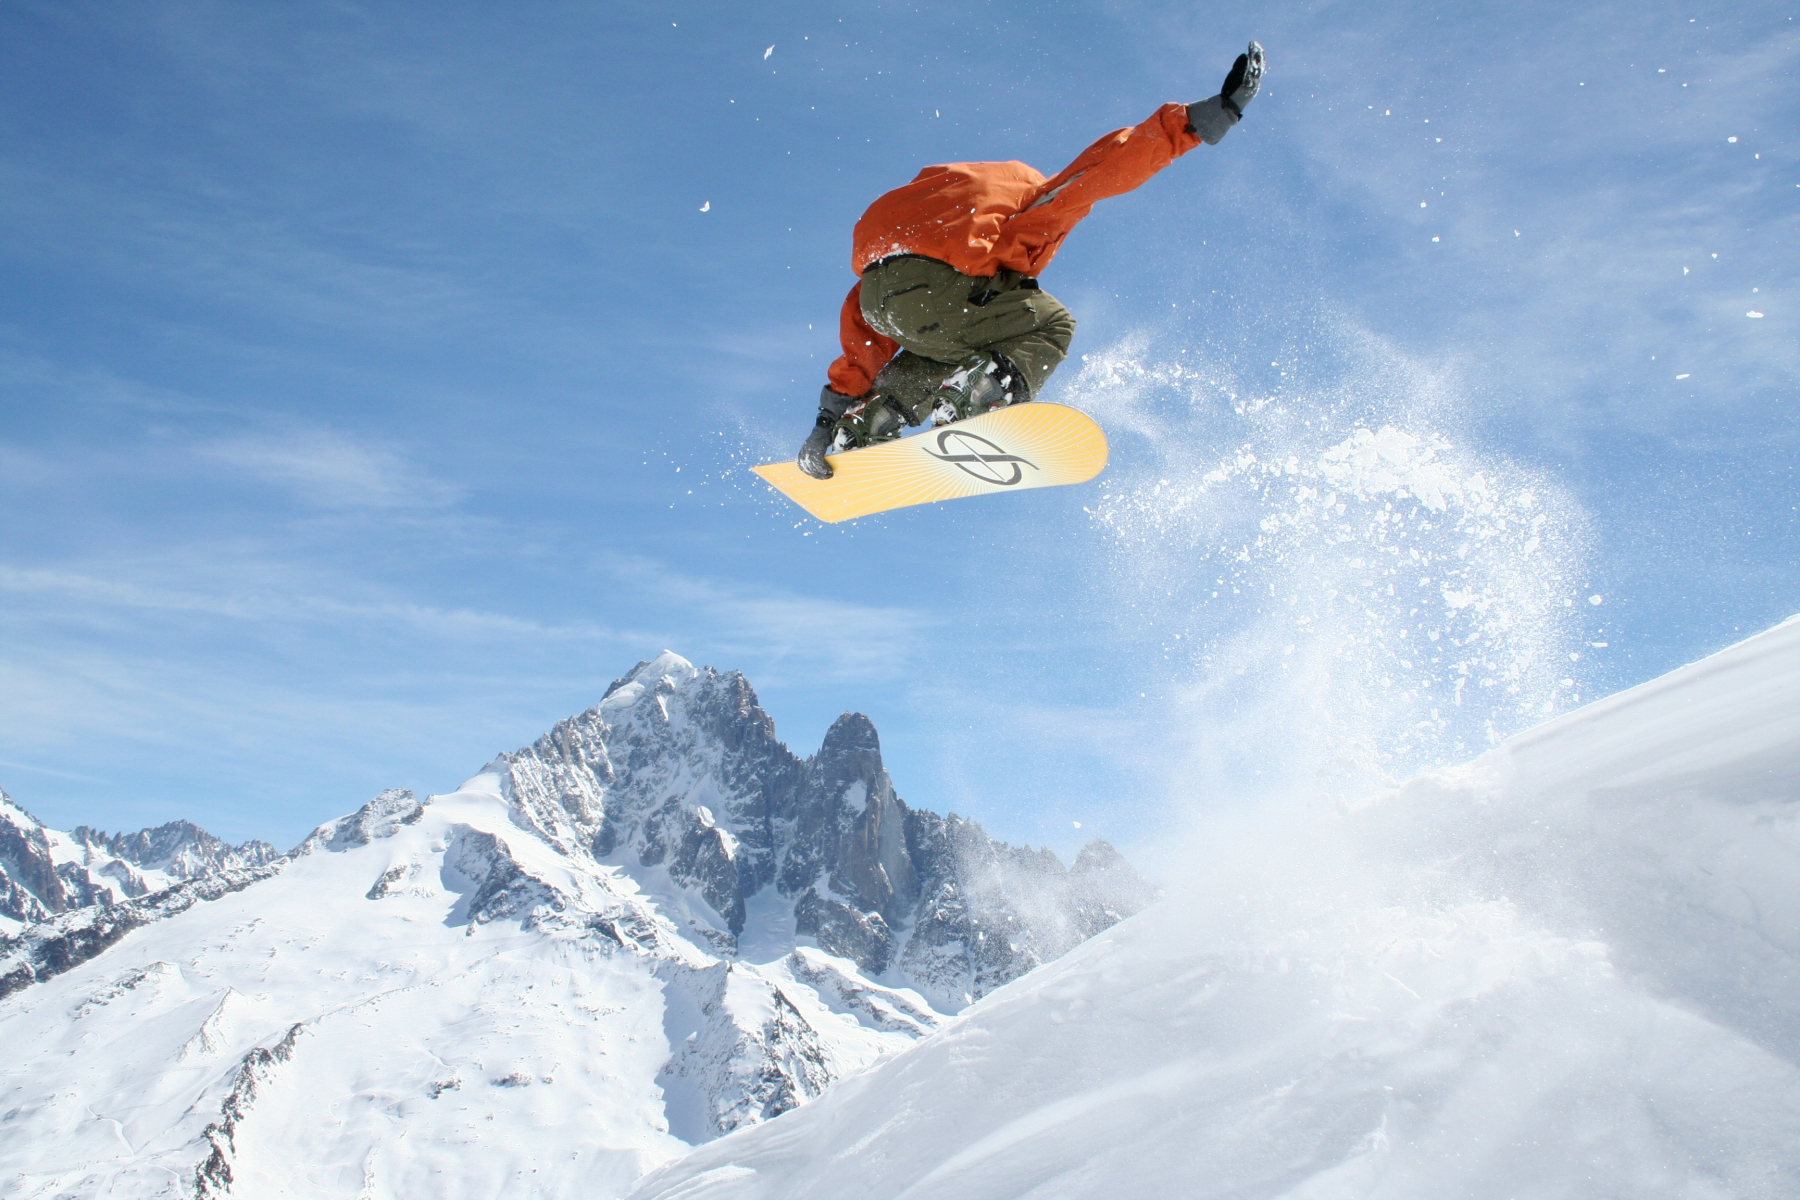 A snowboarder performing a high jump